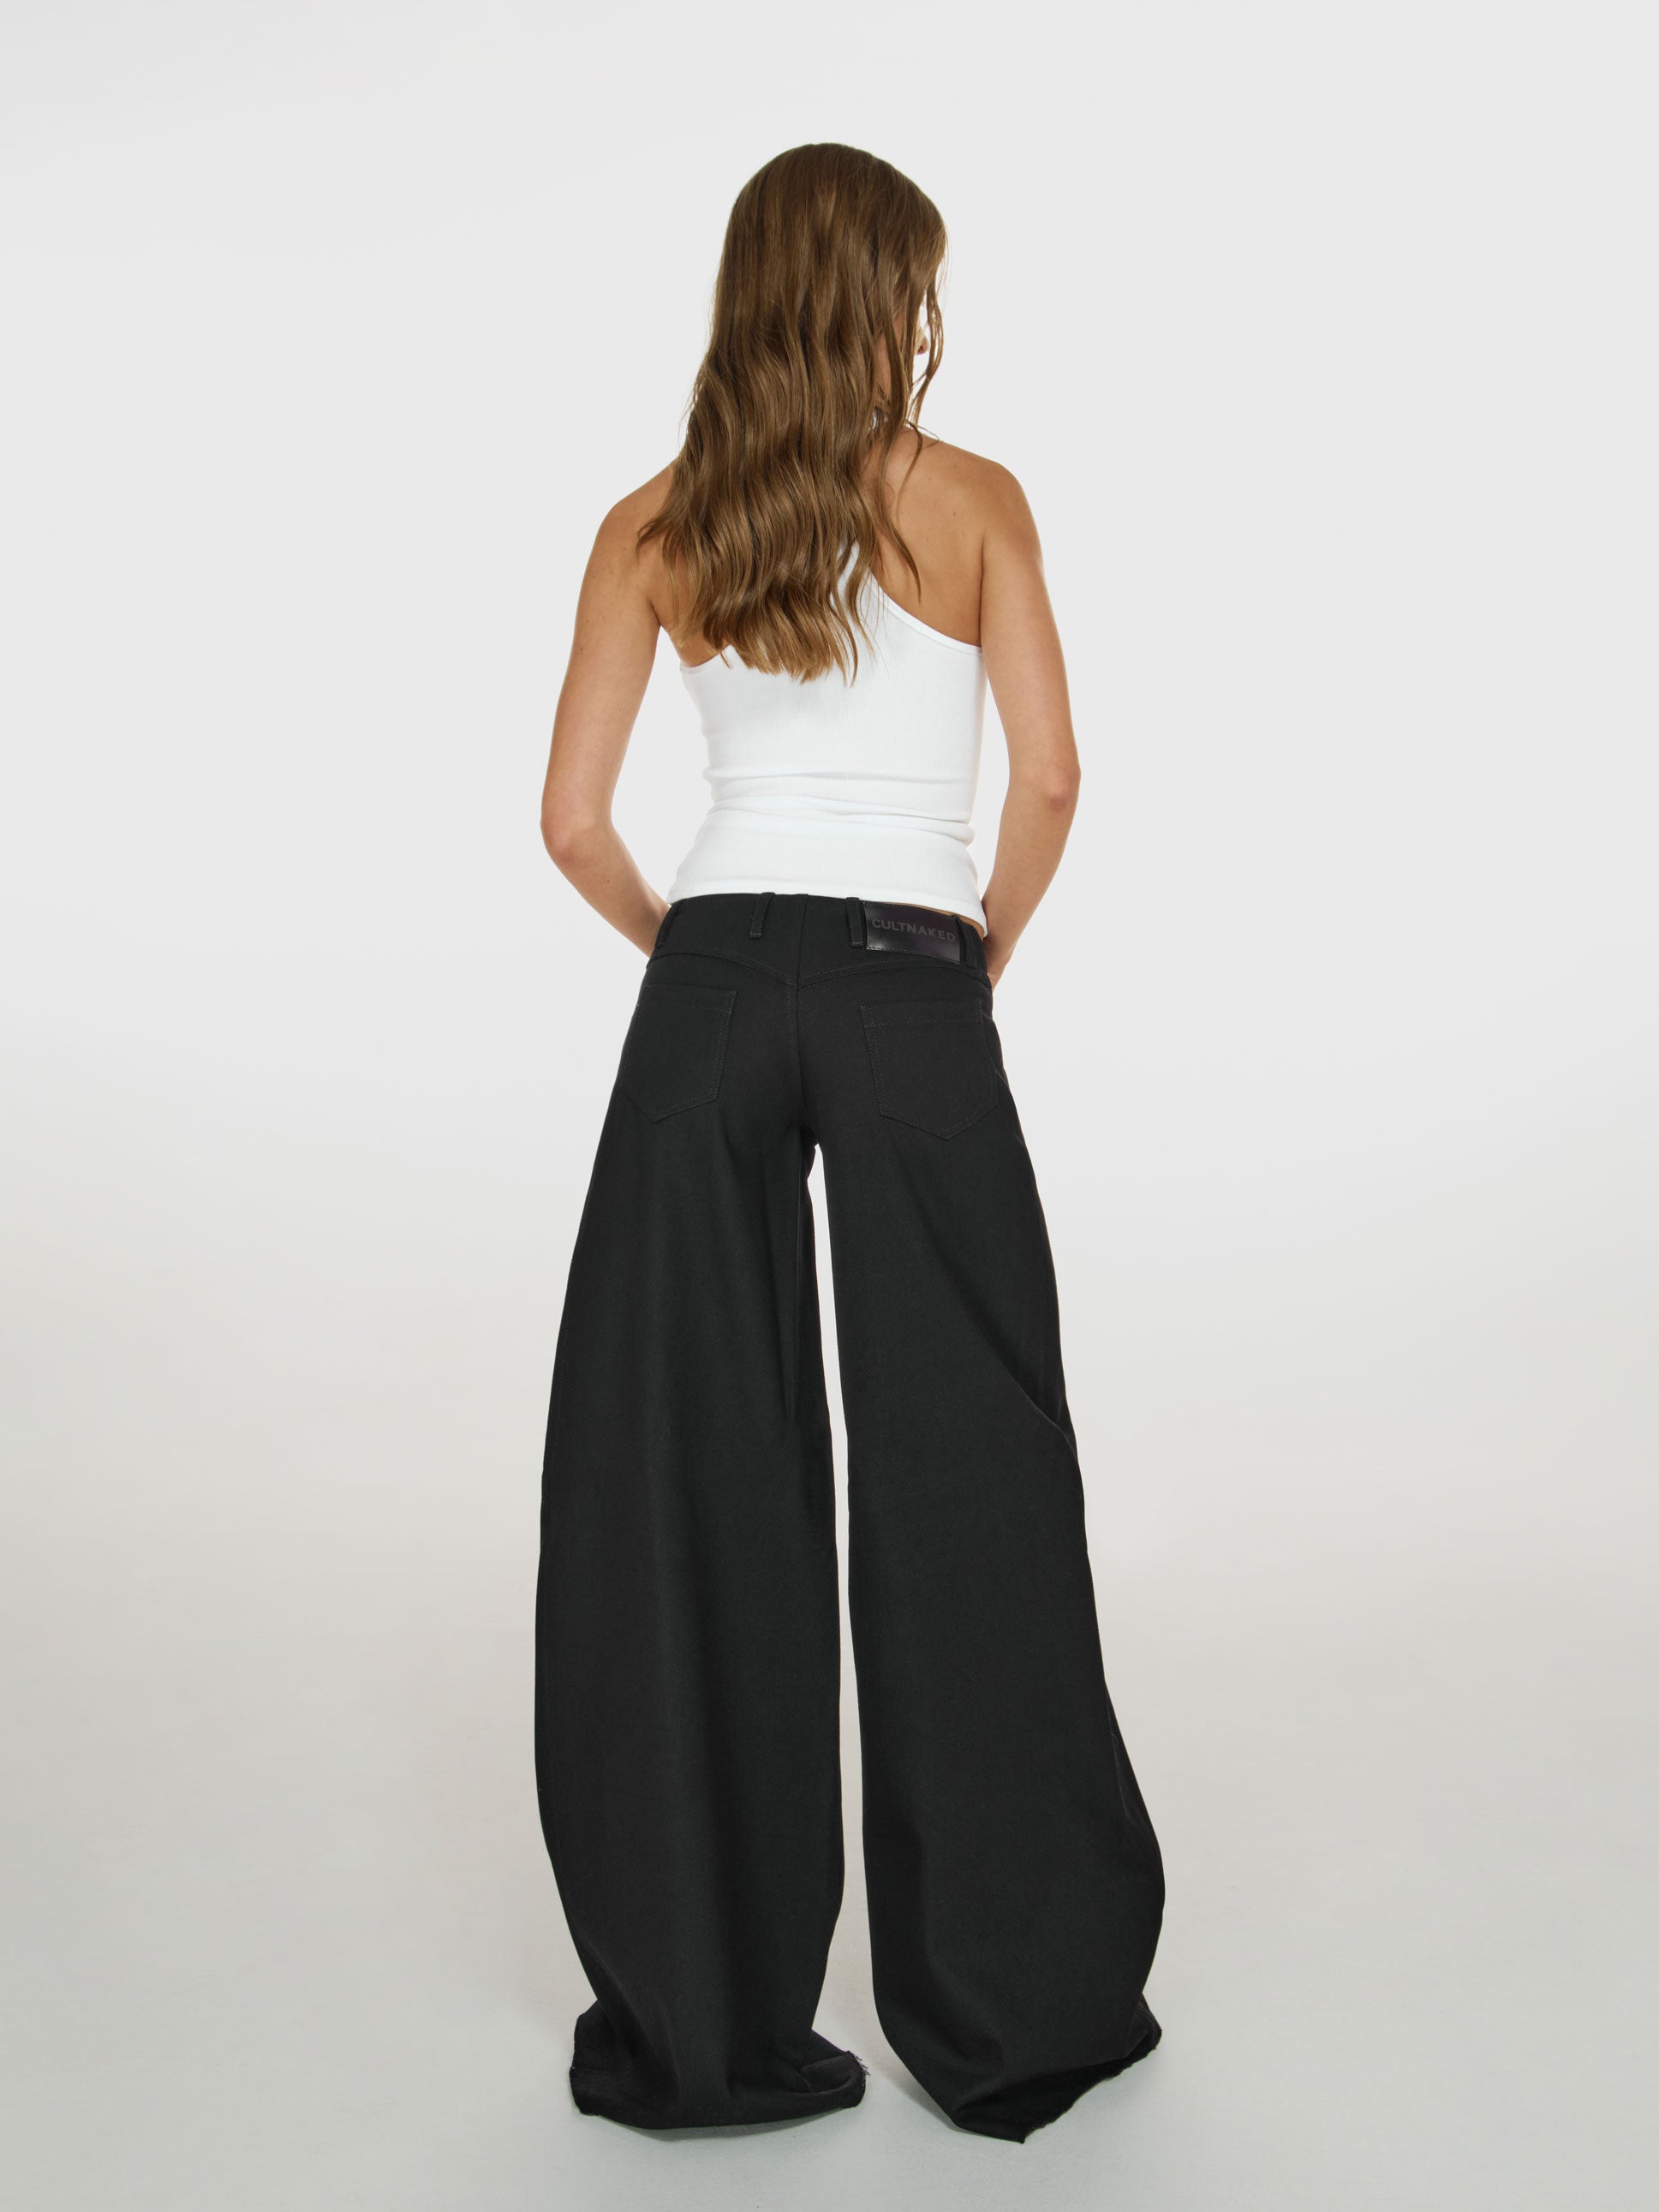 Full shot of a girl facing back in a white viscose tank top and black wide leg jeans with low rise